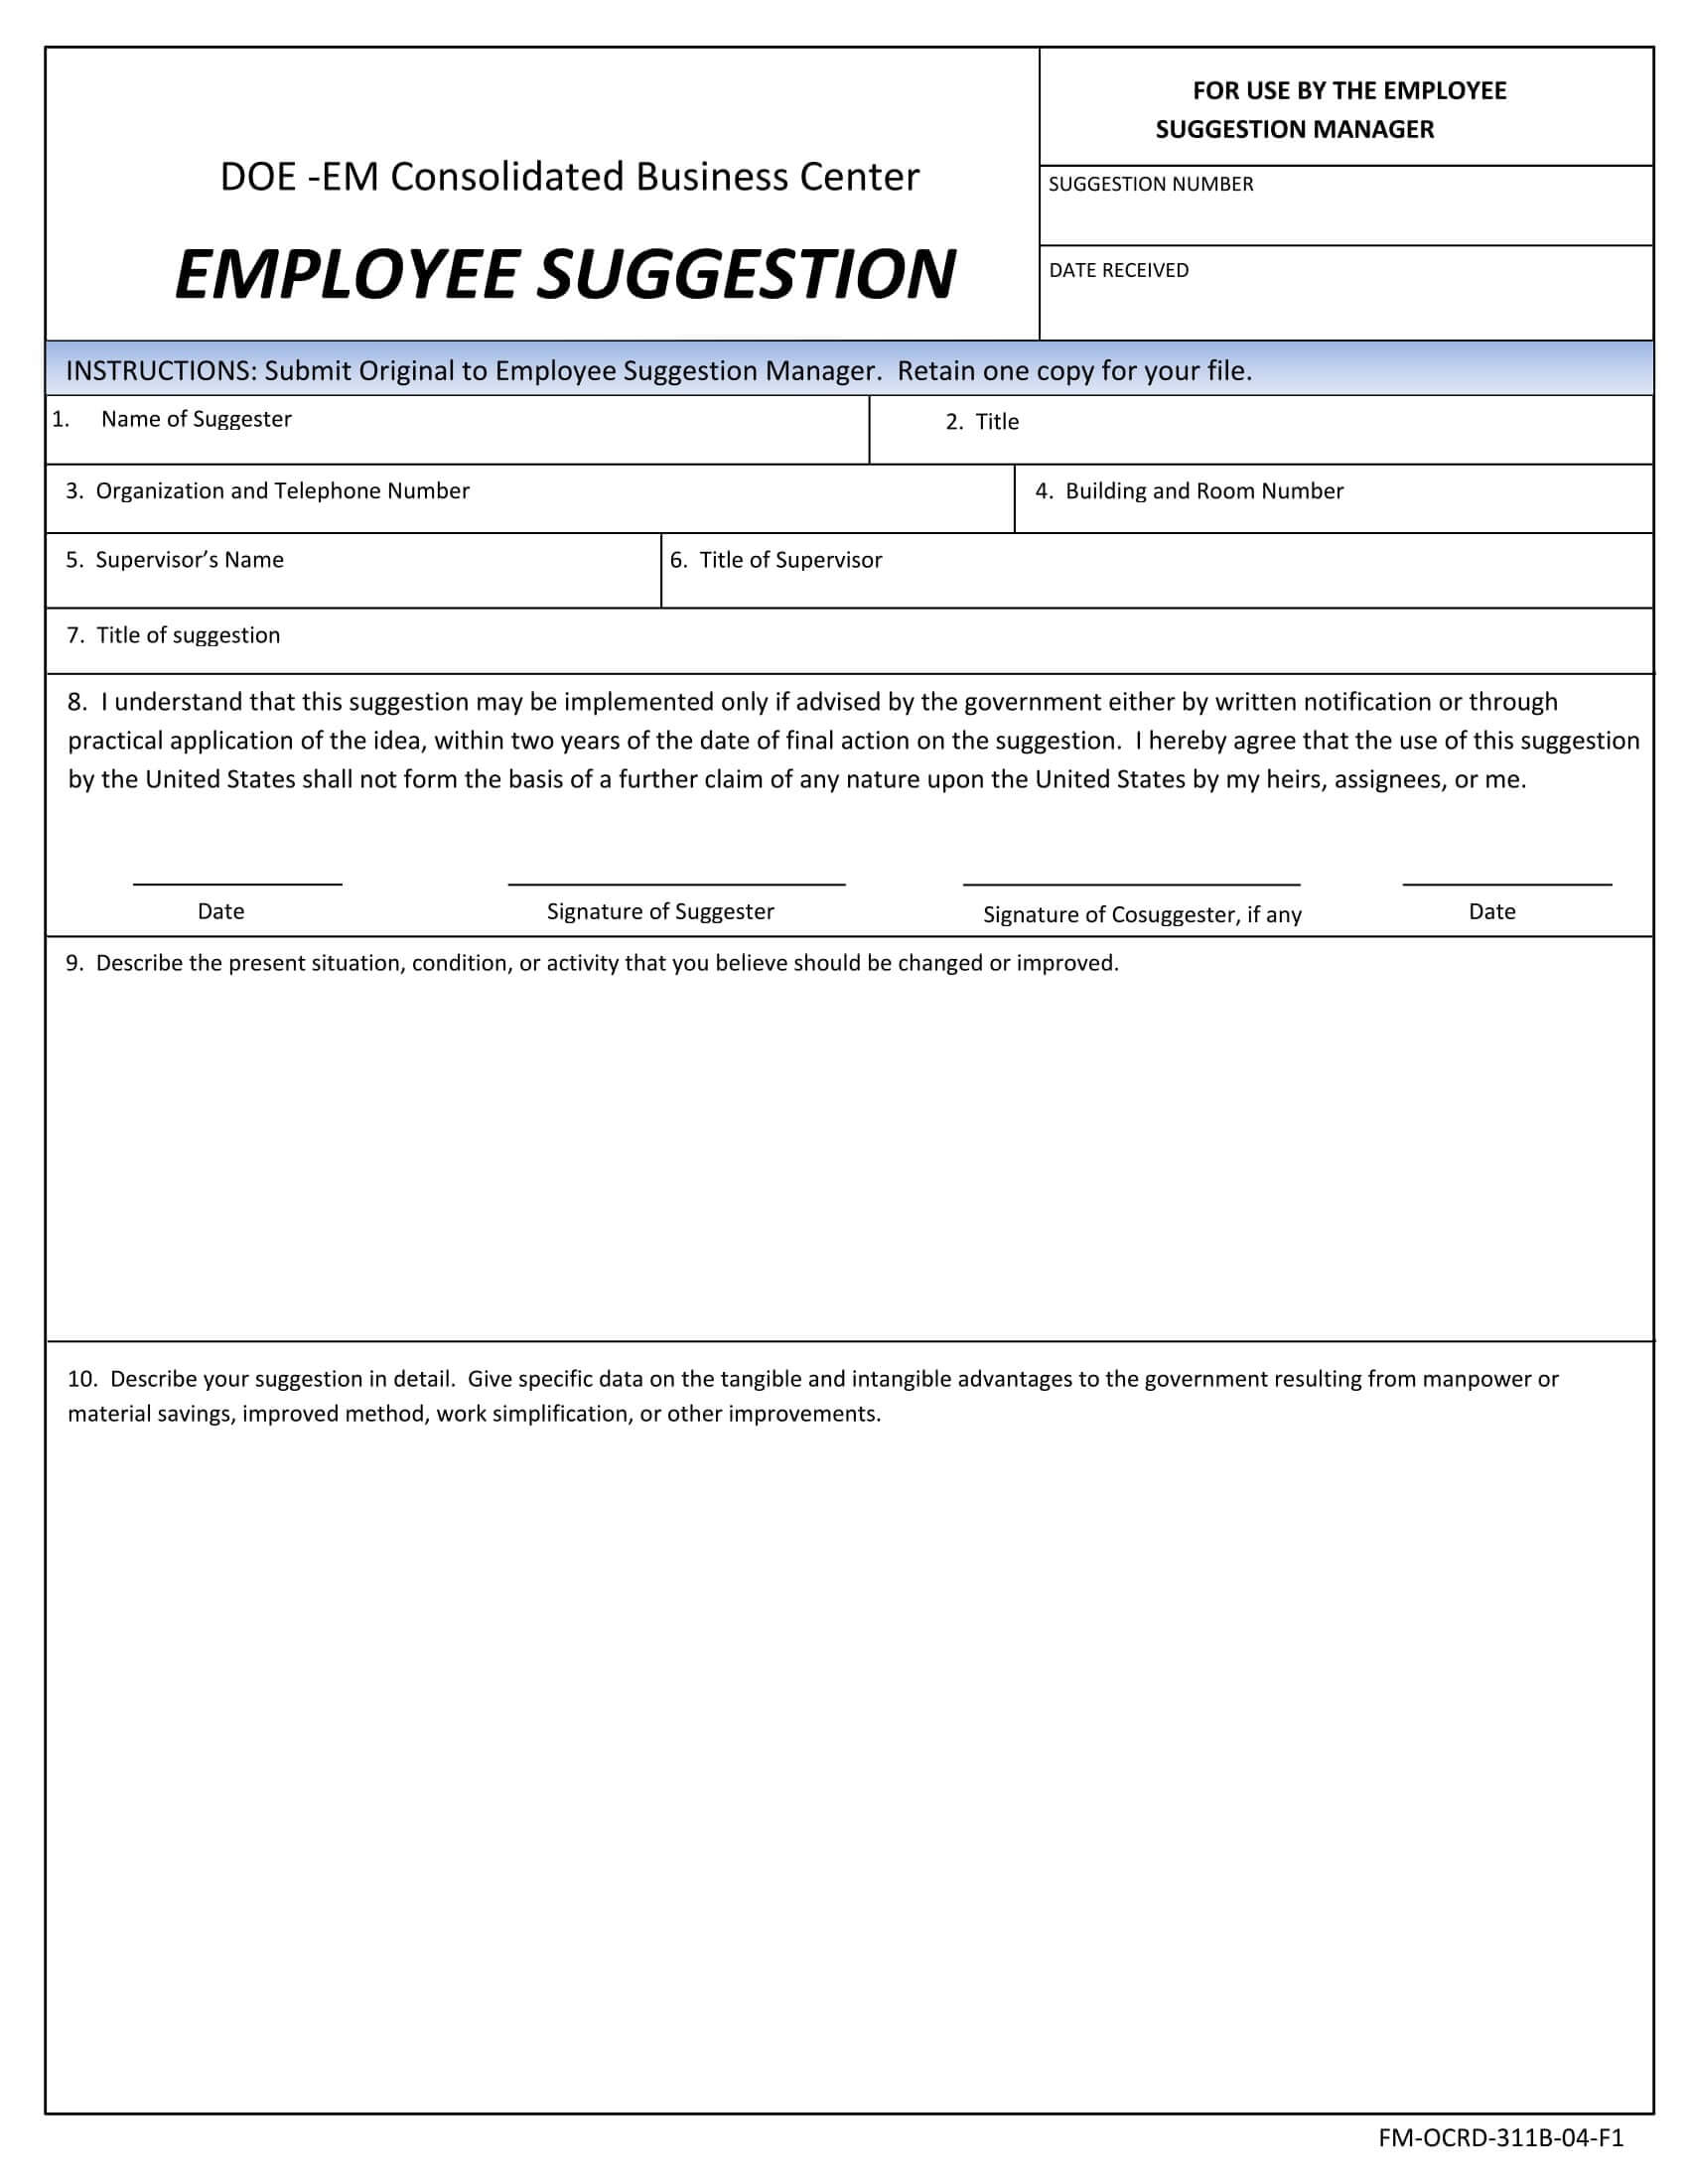 Free 14+ Employee Suggestion Forms In Word | Excel | Pdf For Word Employee Suggestion Form Template